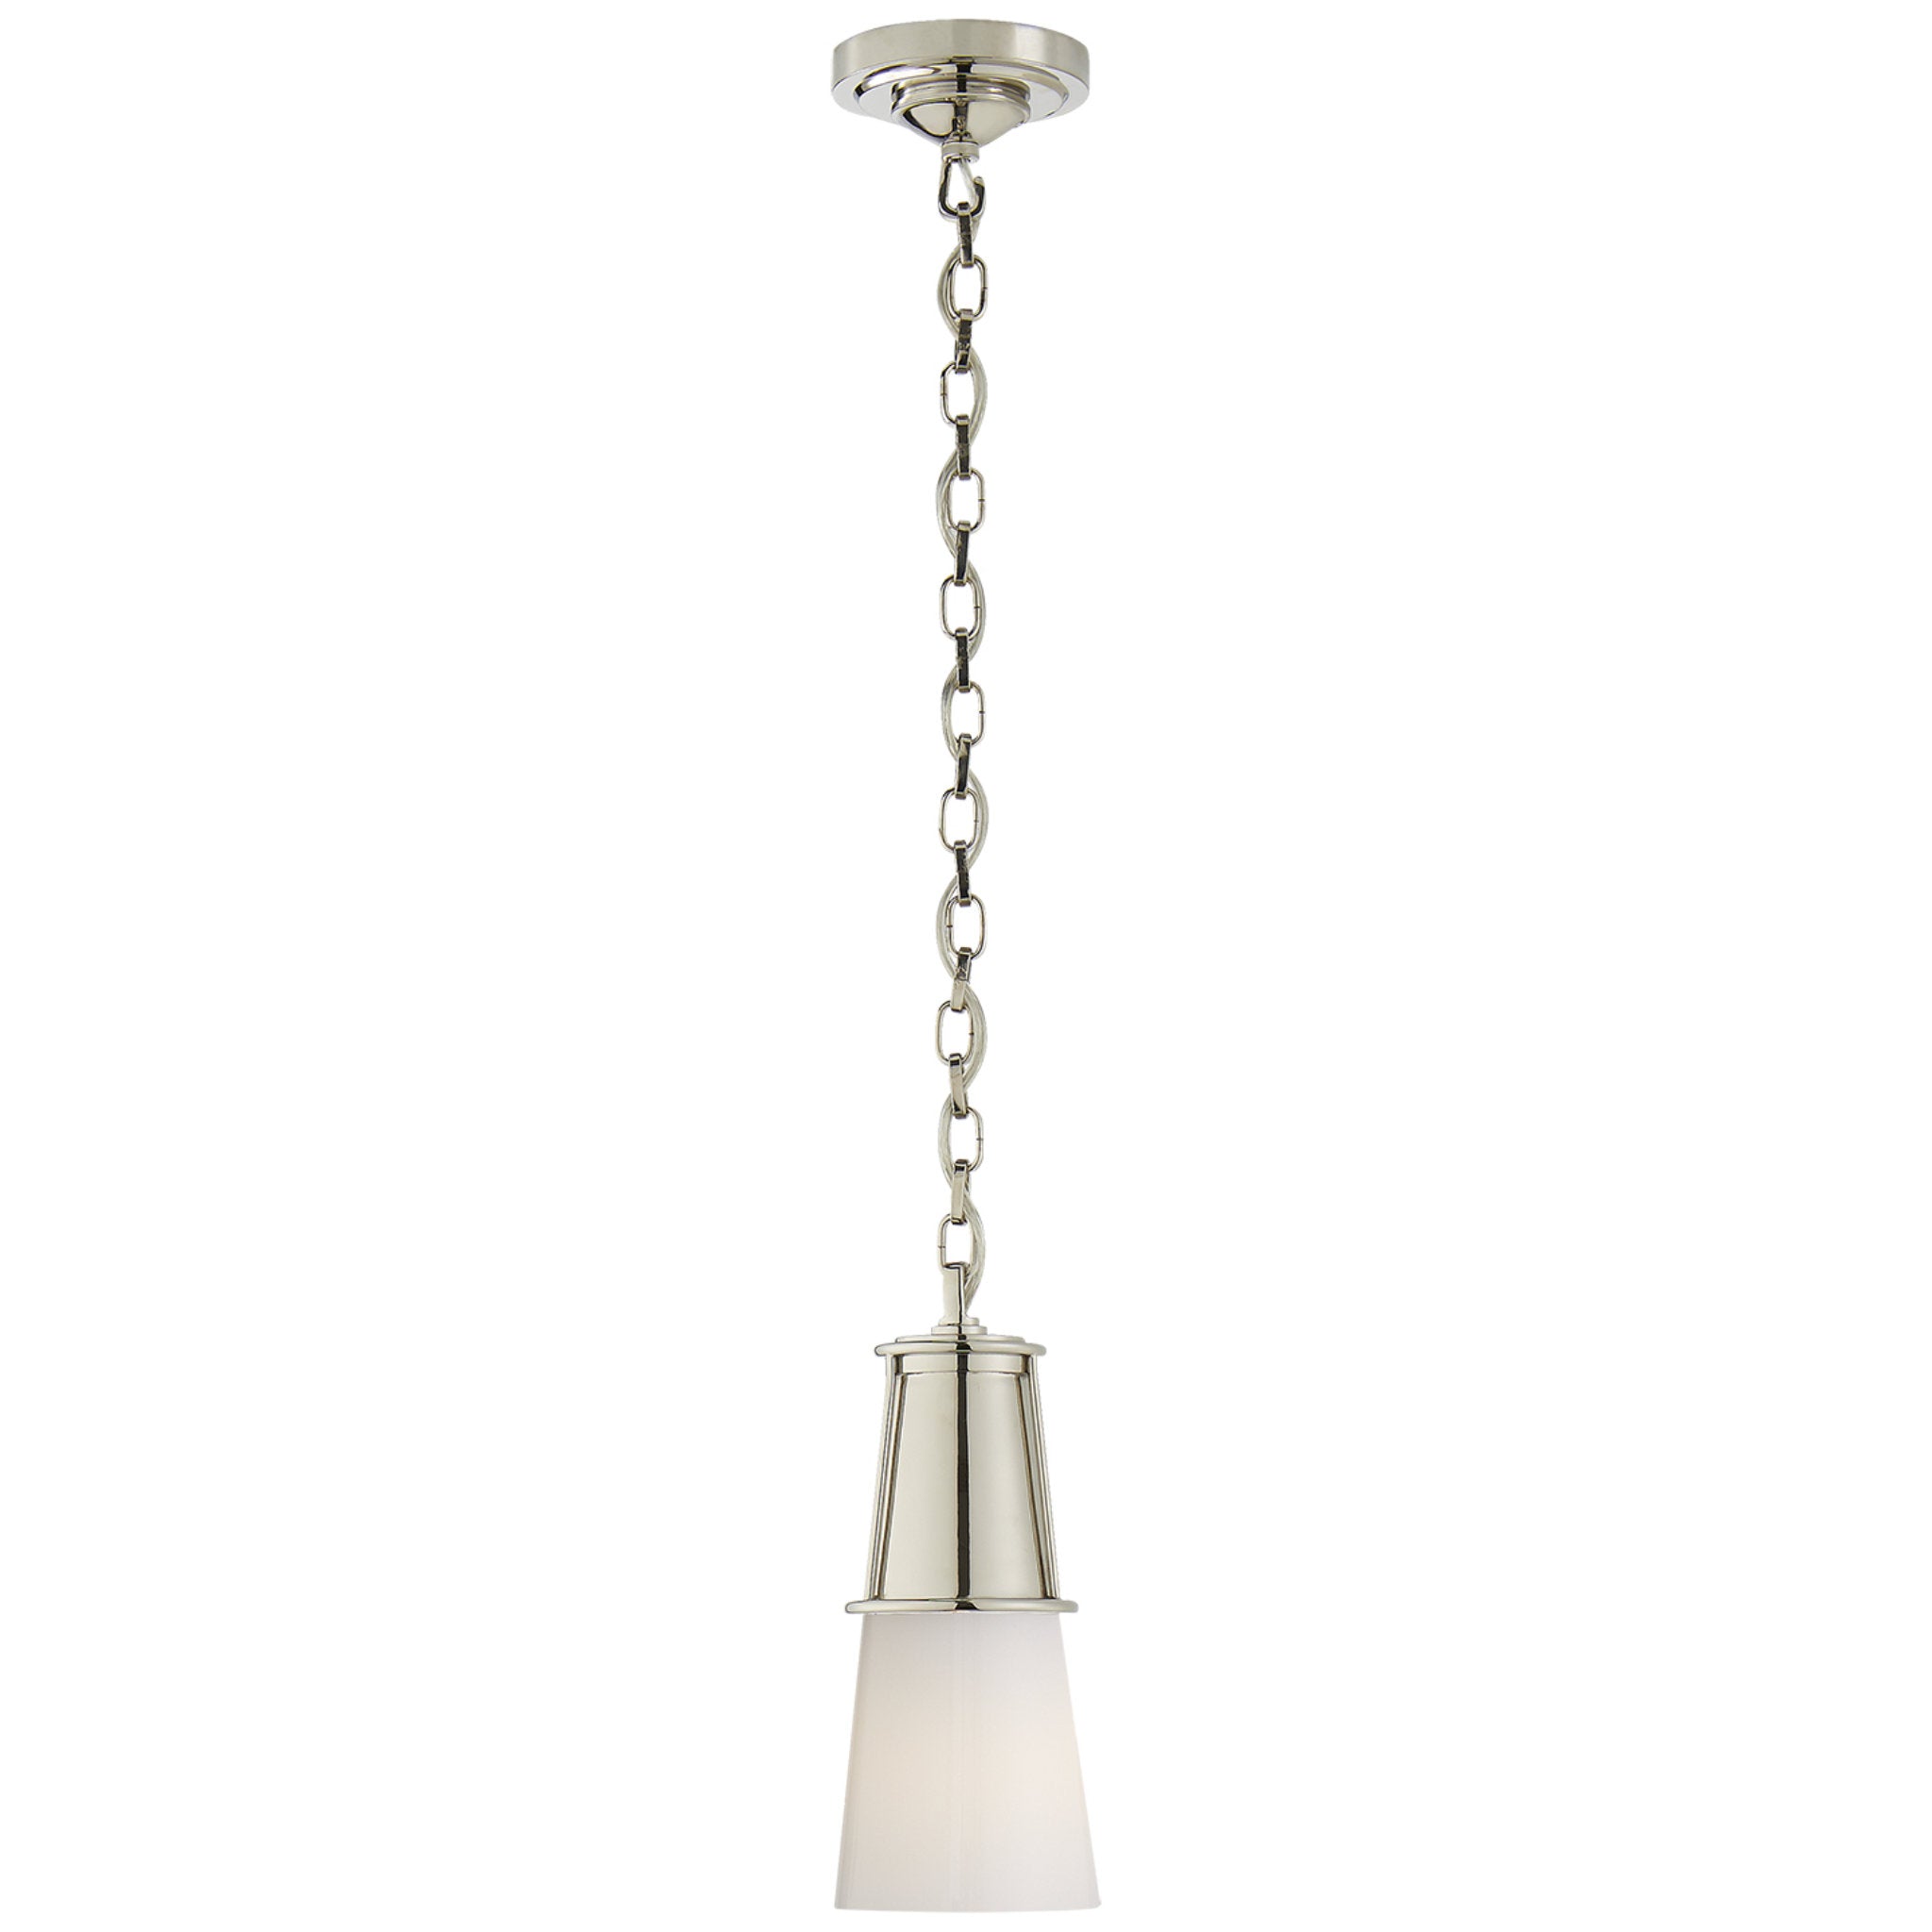 Thomas O'Brien Robinson Small Pendant in Polished Nickel with White Glass